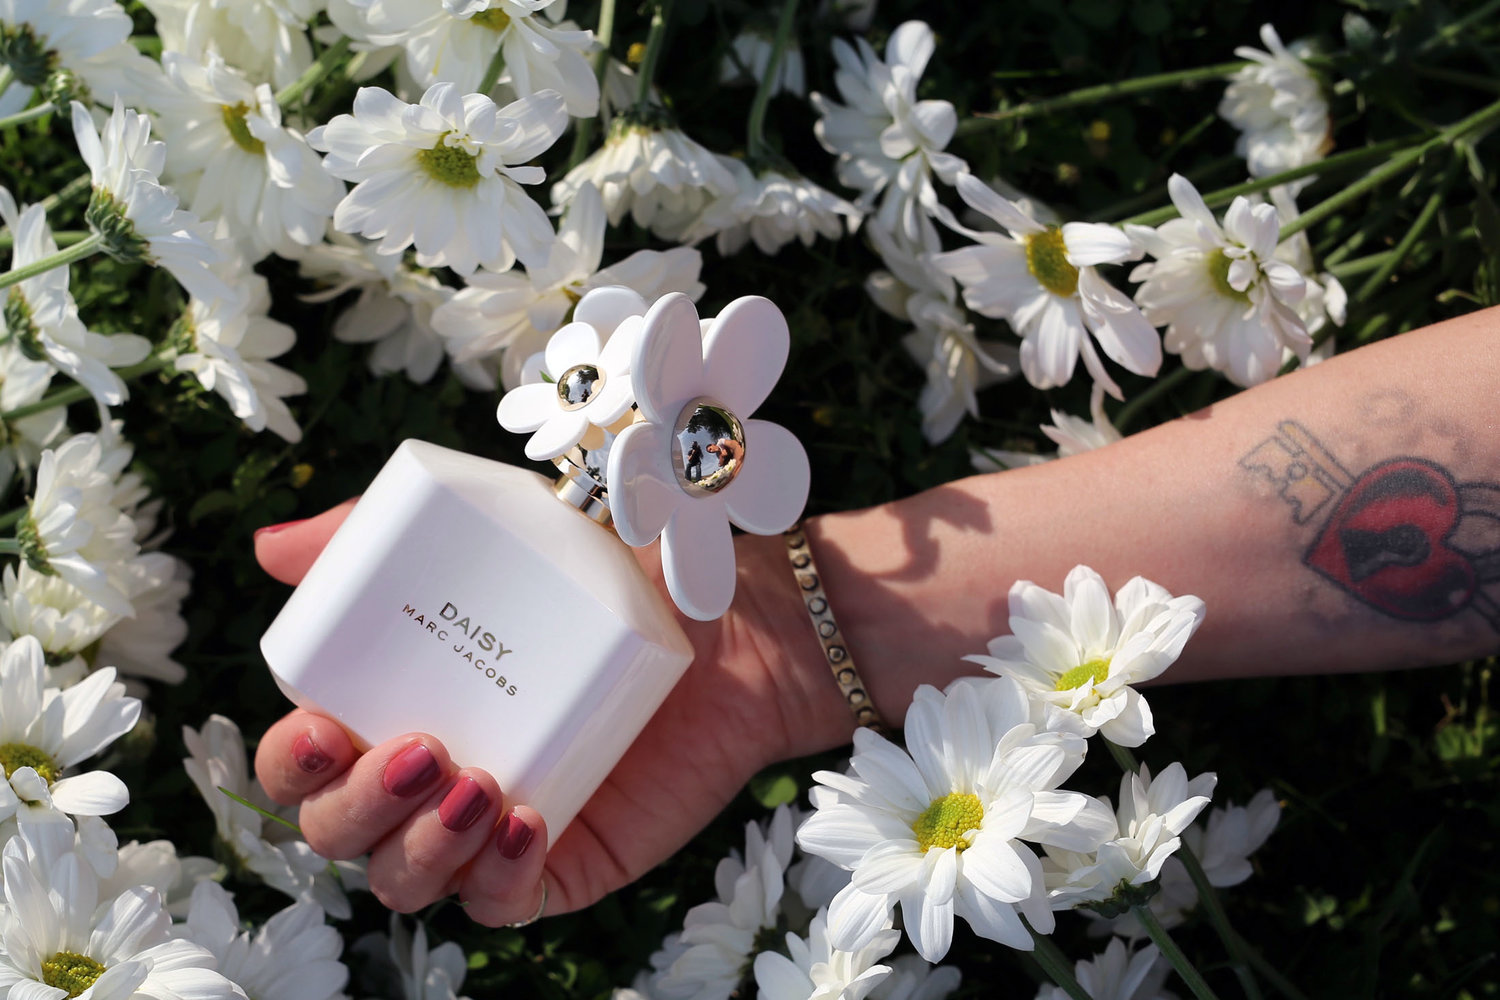 Marc Jacobs Daisy Celebrates 10 years with a limited edish bottle ...